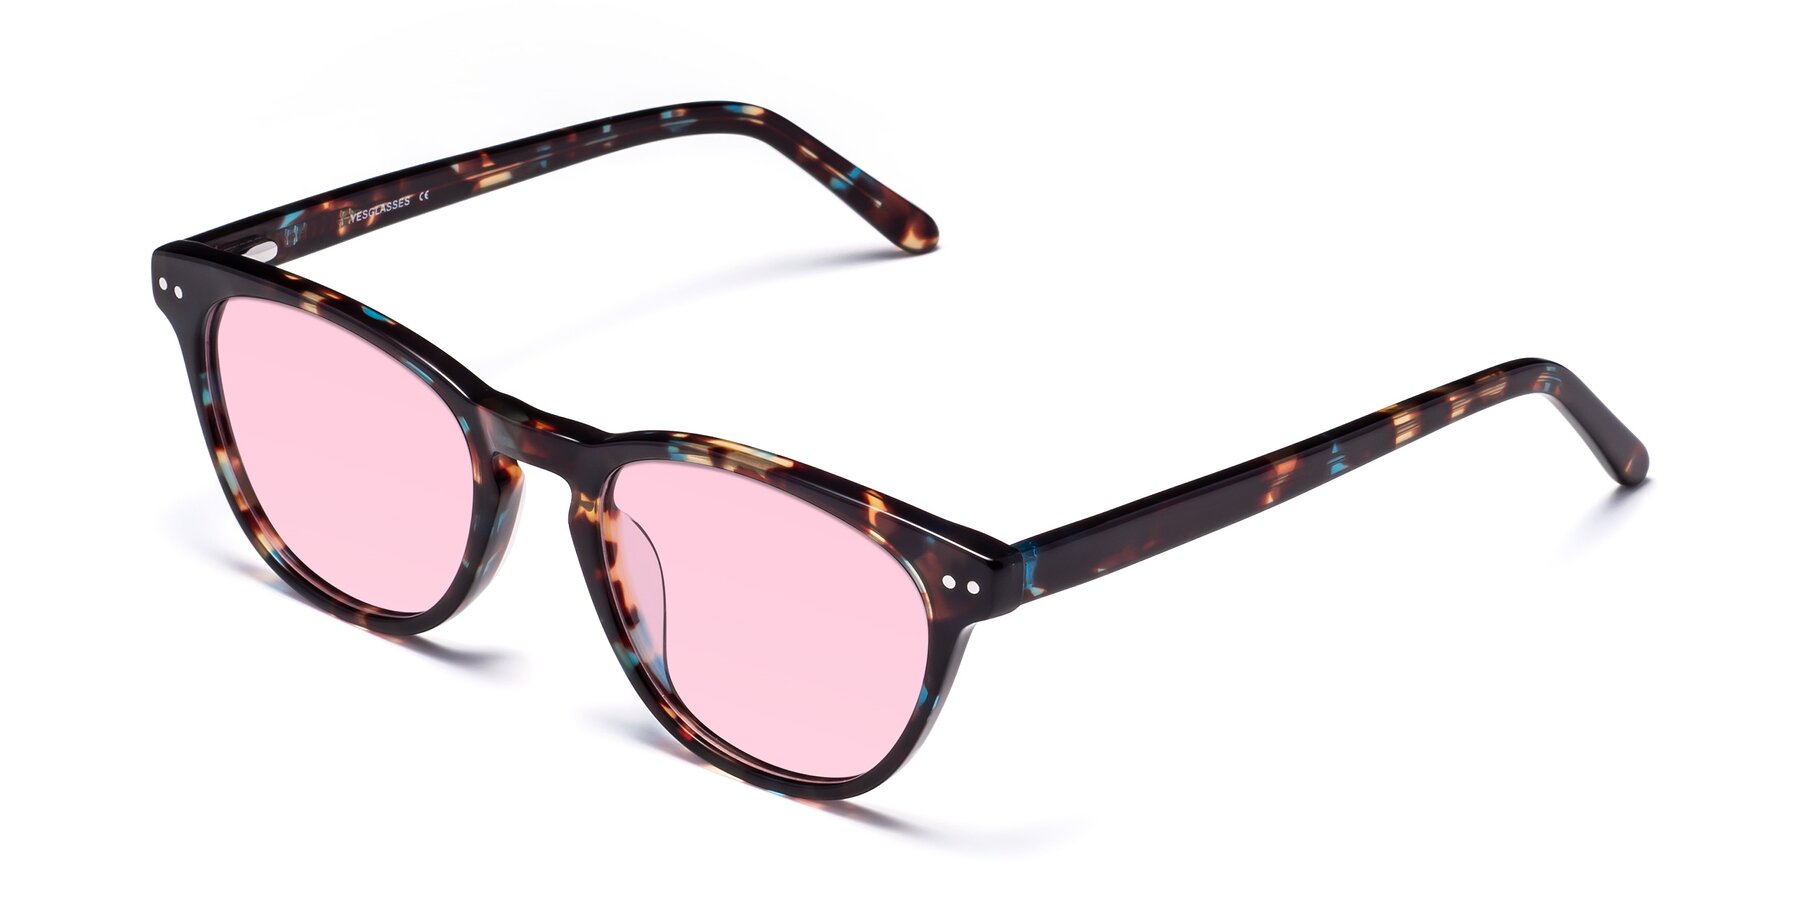 Angle of Blaze in Tortoise-Blue with Light Pink Tinted Lenses